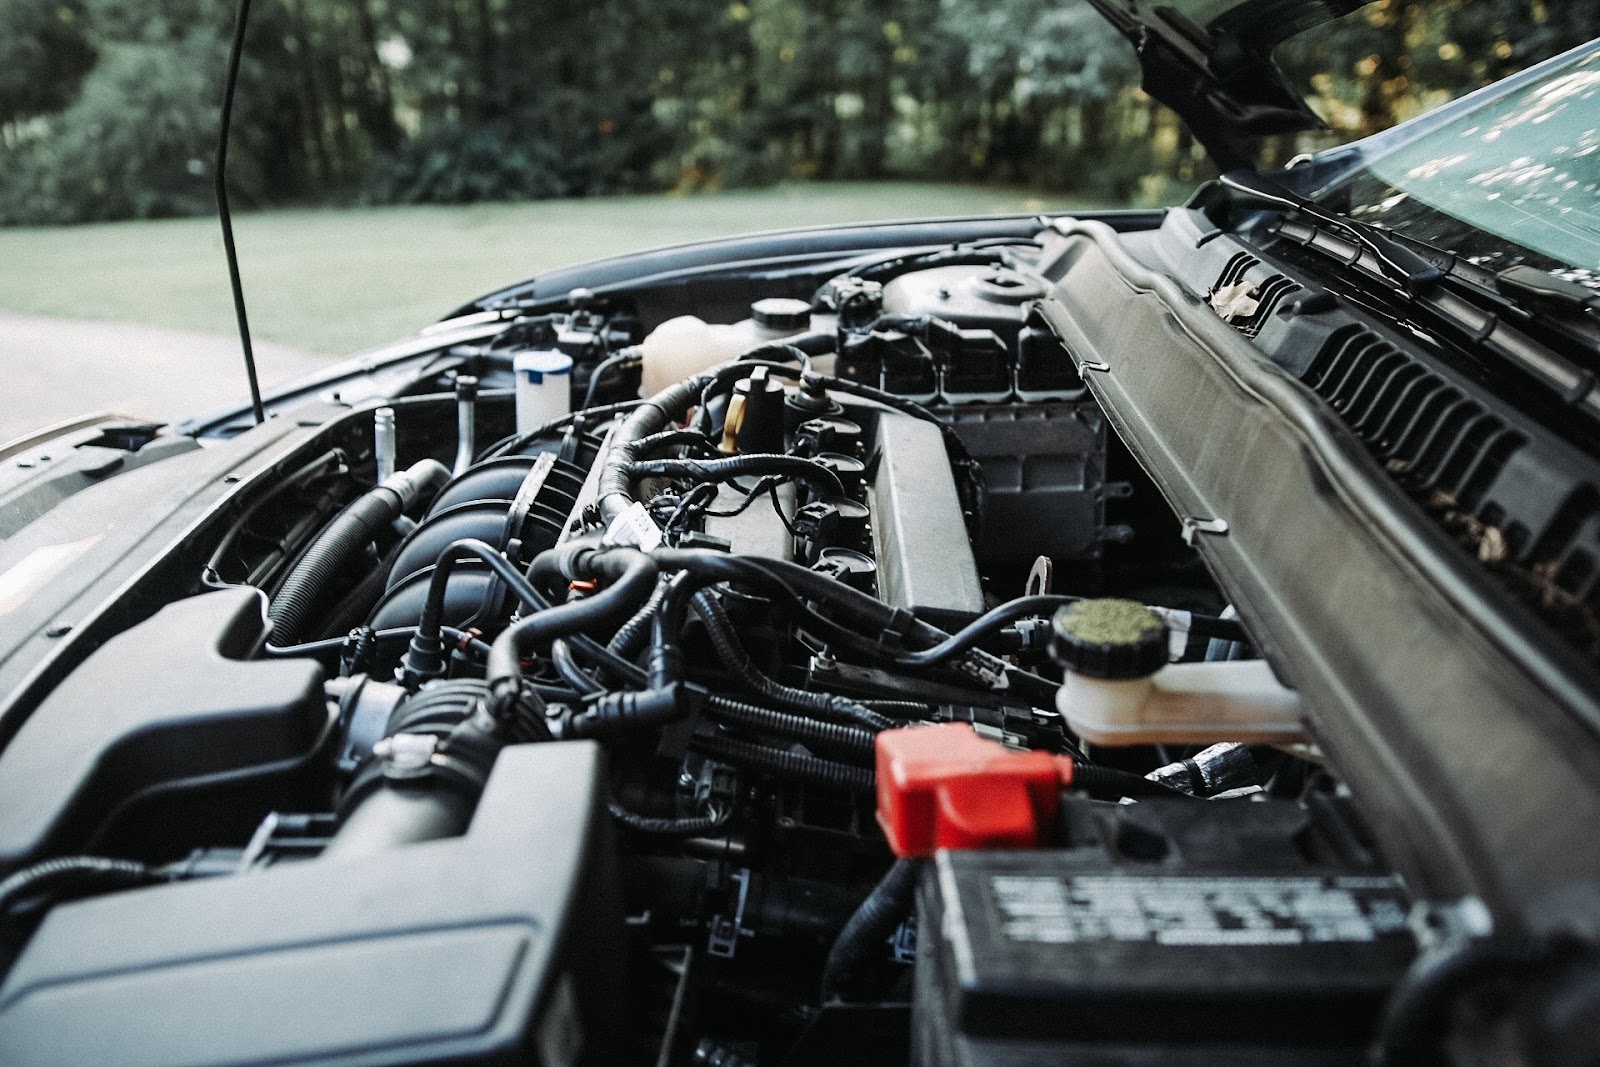 3HEhQOweI 1e4vpsTN7RfSGklwQ hMbI9Cpoah6STtioTf7hgUAzM9KXI oSK9lKdSI0eZjc 5 tips to prep your car for Birmingham’s sizzling summers from an automotive specialist